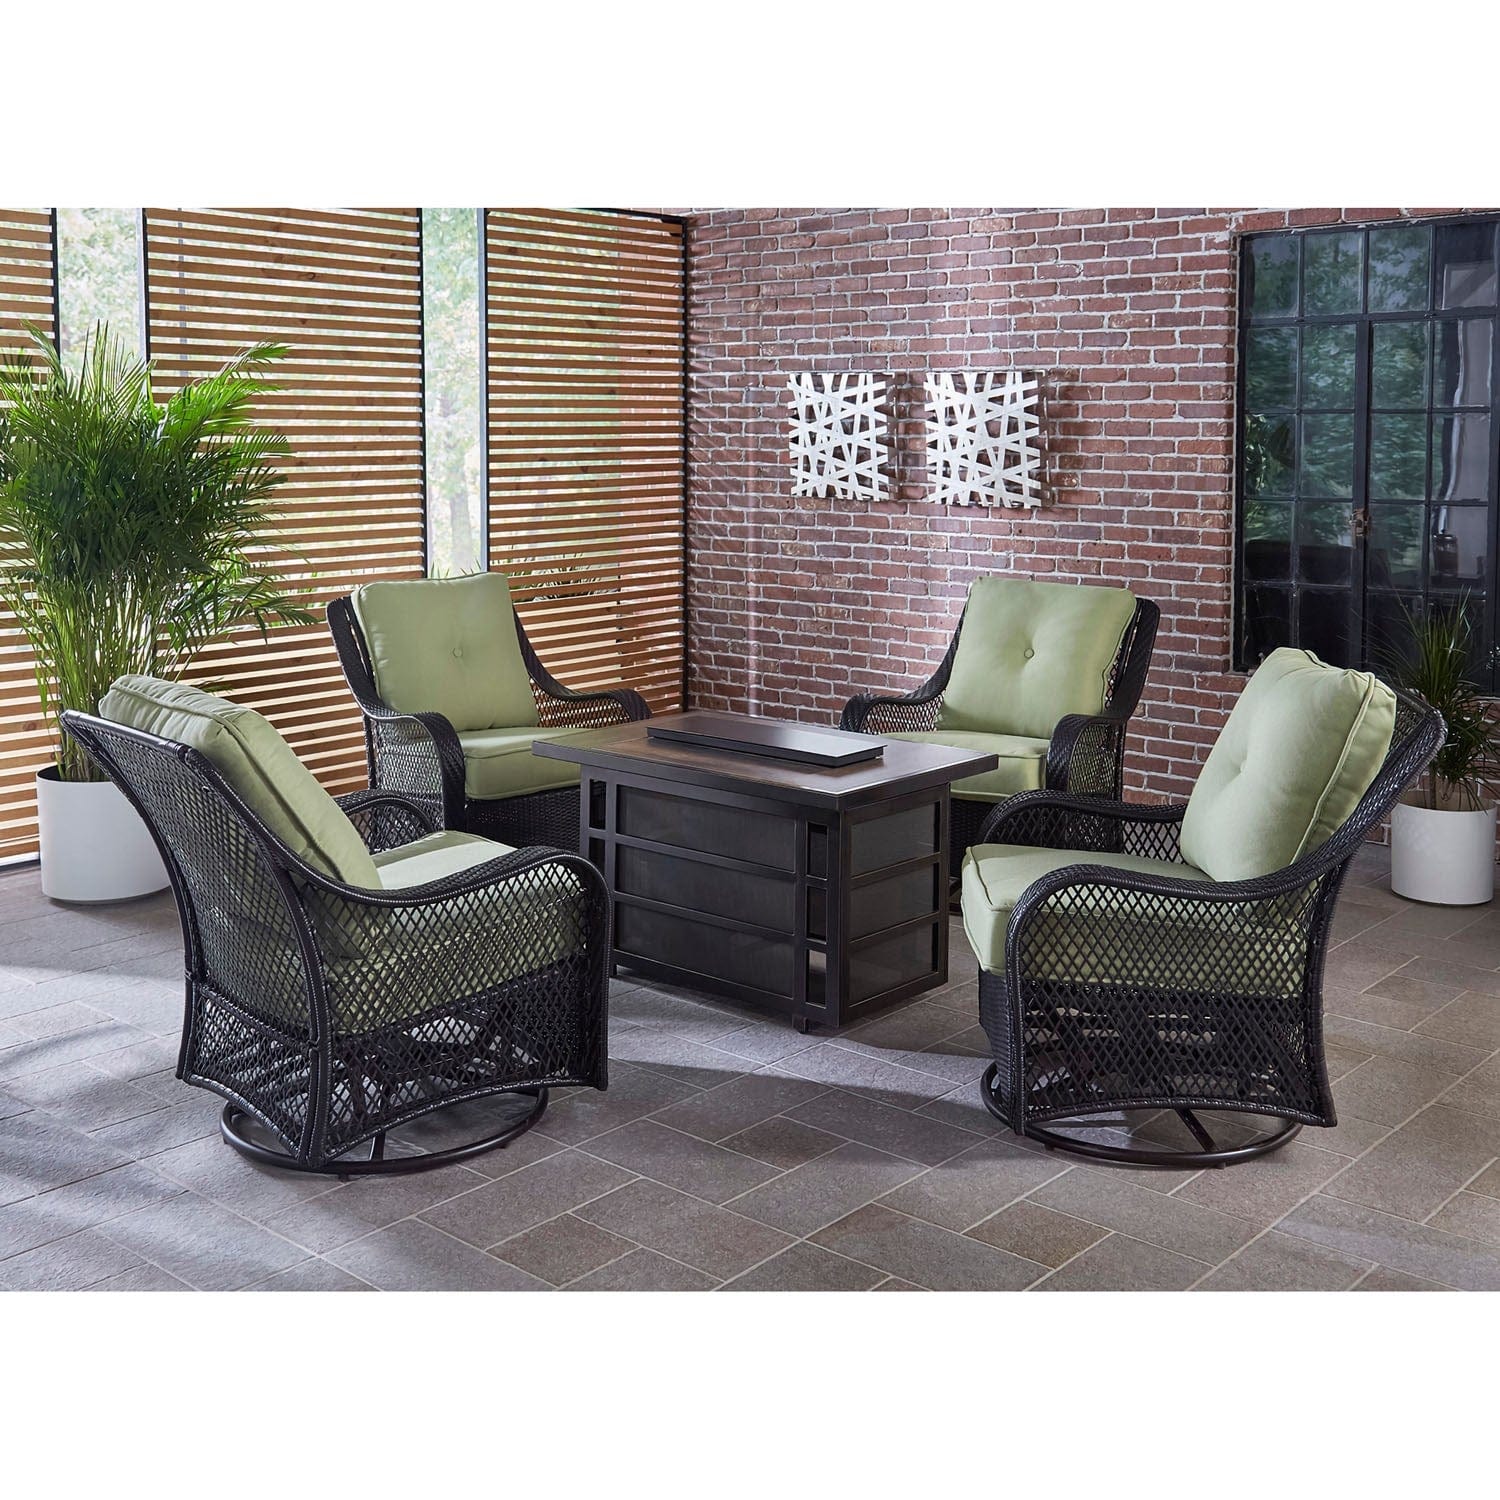 Hanover Fire Pit Chat Set Hanover Orleans 5-Piece Wicker Fire Pit Chat Set with a 30,000 BTU Fire Pit Table and 4 Woven Swivel Gliders in Avocado Green | ORL5PCSW4RECFP-GRN